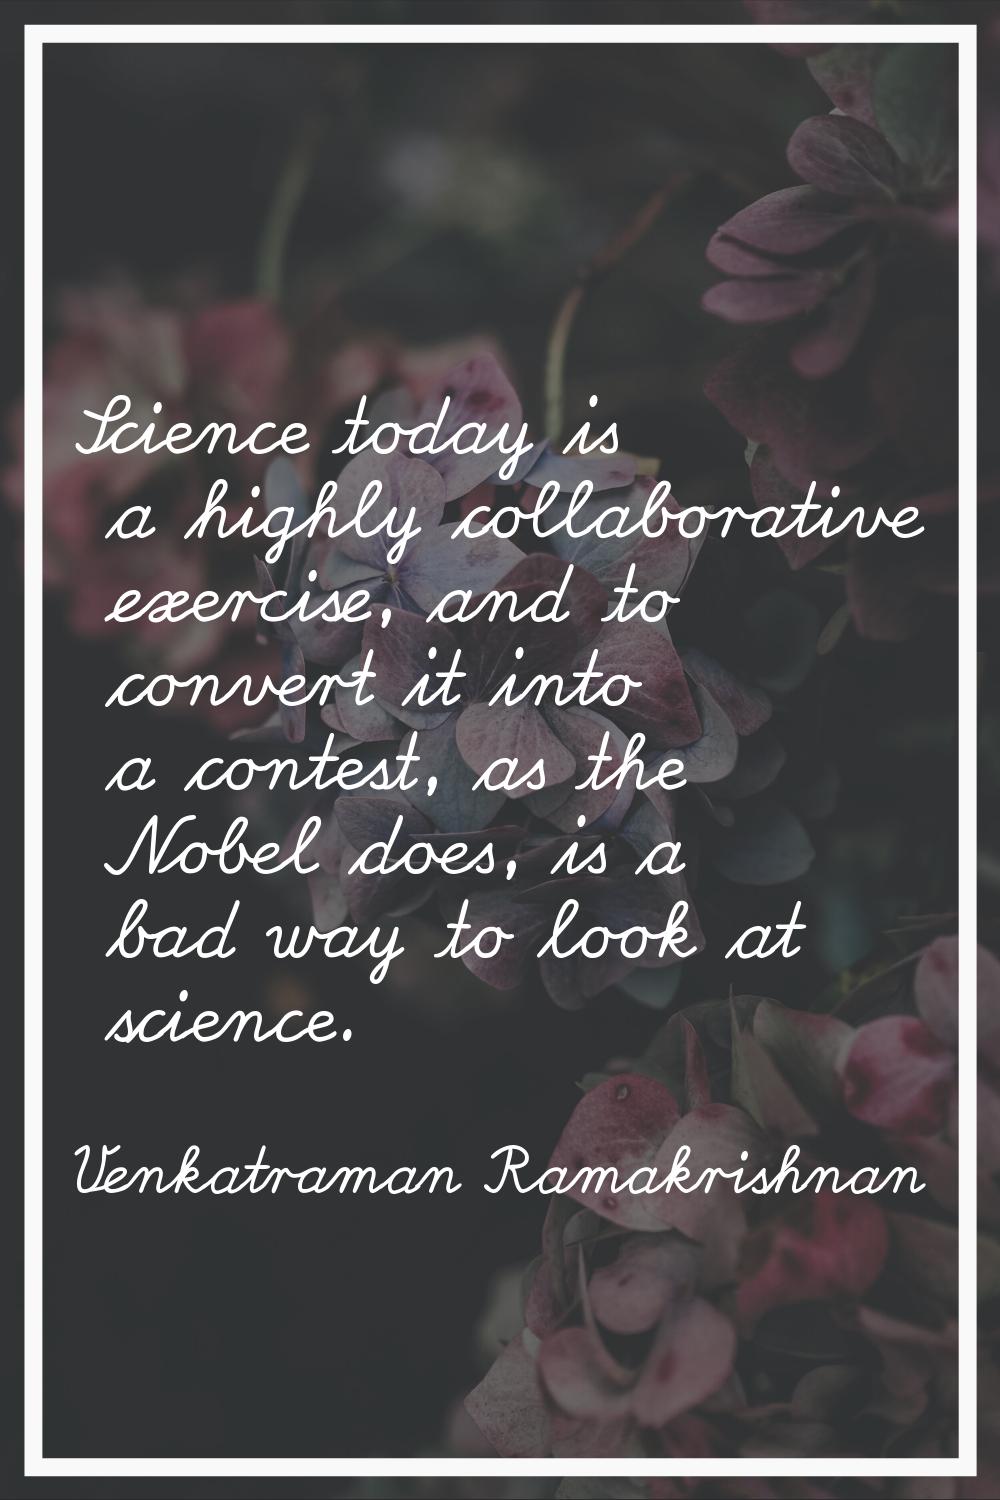 Science today is a highly collaborative exercise, and to convert it into a contest, as the Nobel do